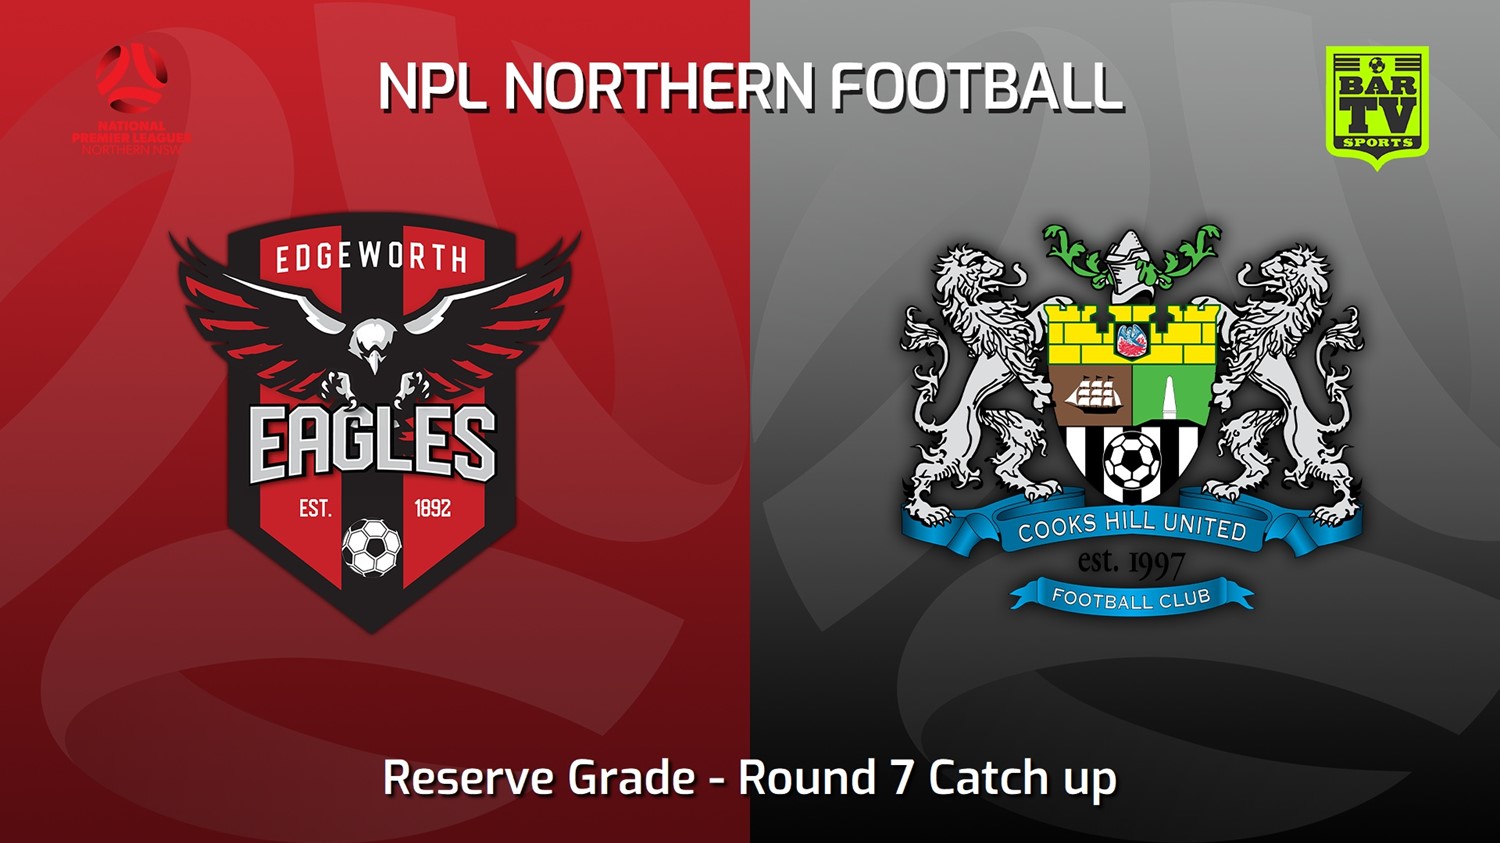 230607-NNSW NPLM Res Round 7 Catch up - Edgeworth Eagles Res v Cooks Hill United FC (Res) Minigame Slate Image